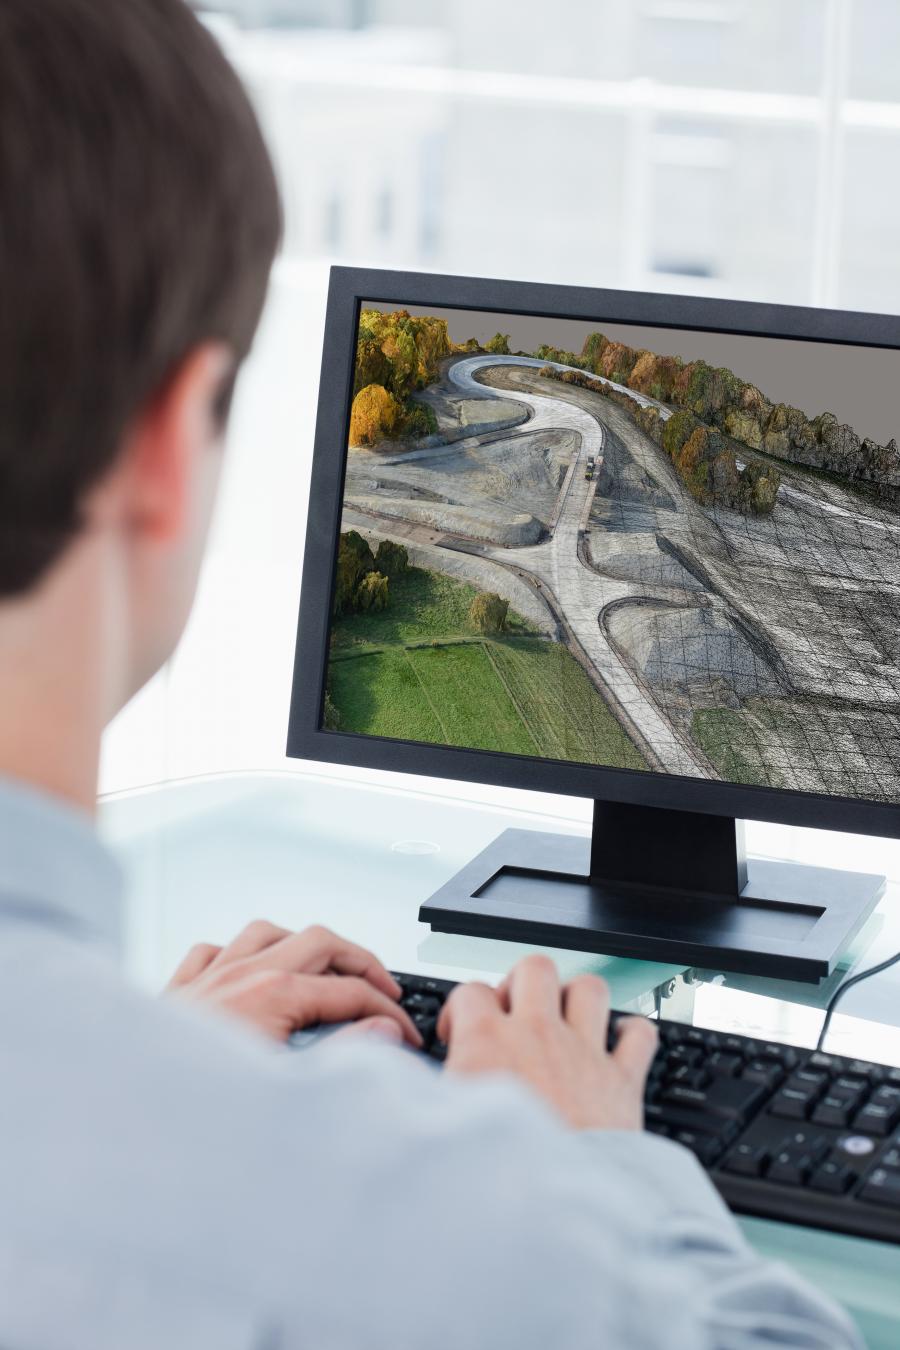 Topcon ContextCapture, powered by Bentley Systems, is a reality modeling software solution.